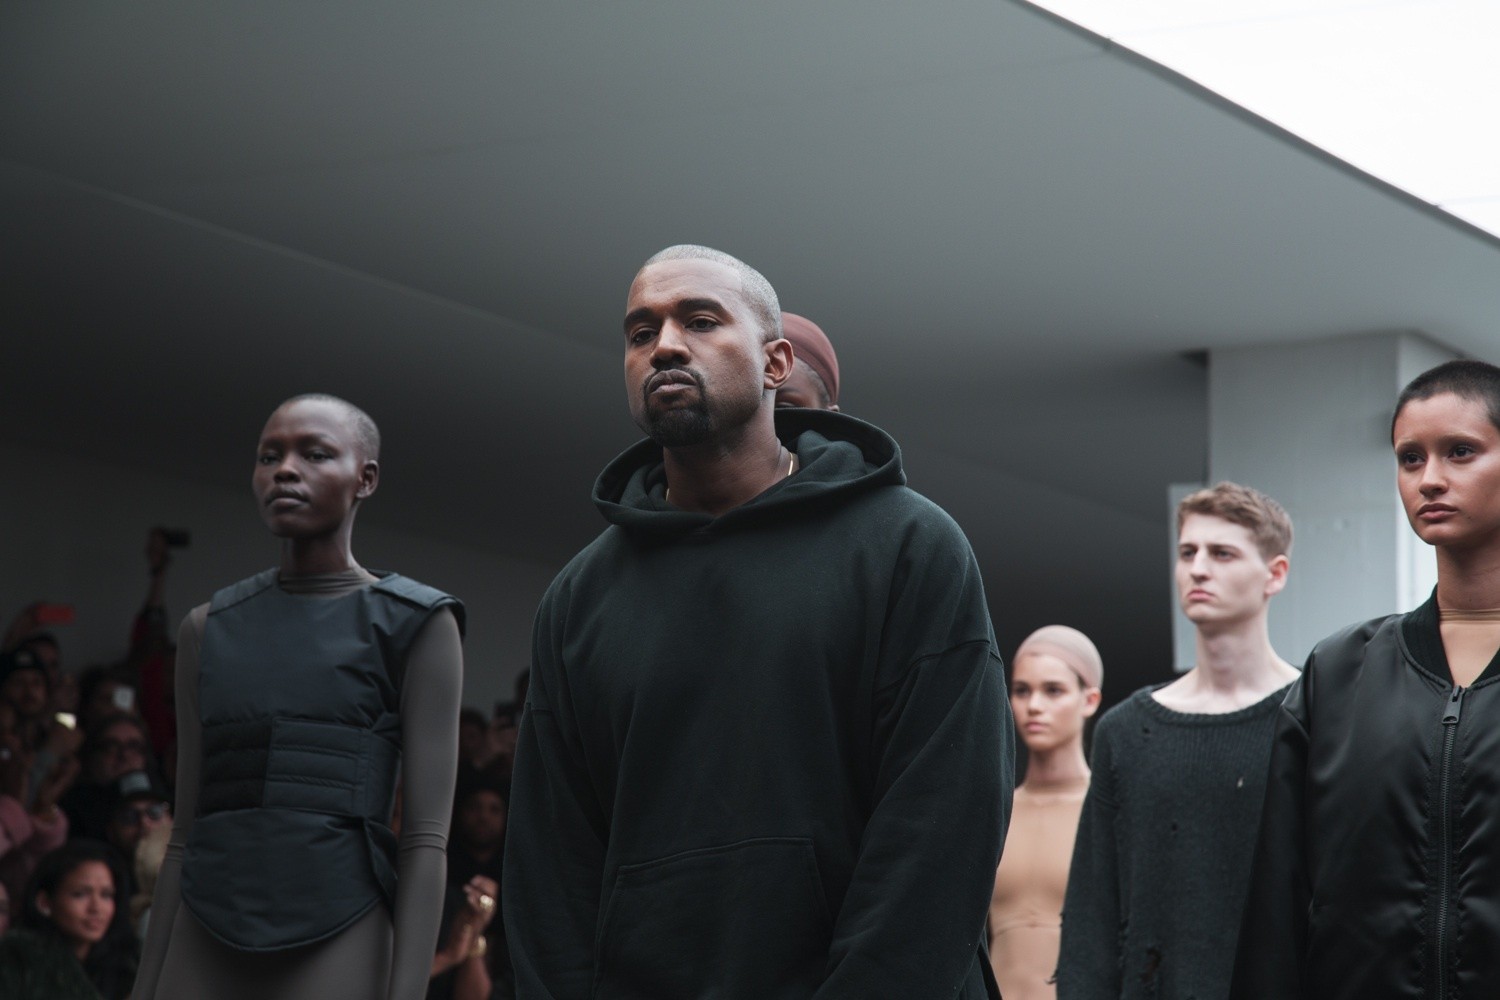 Kanye West Cries After Louis Vuitton Fashion Show